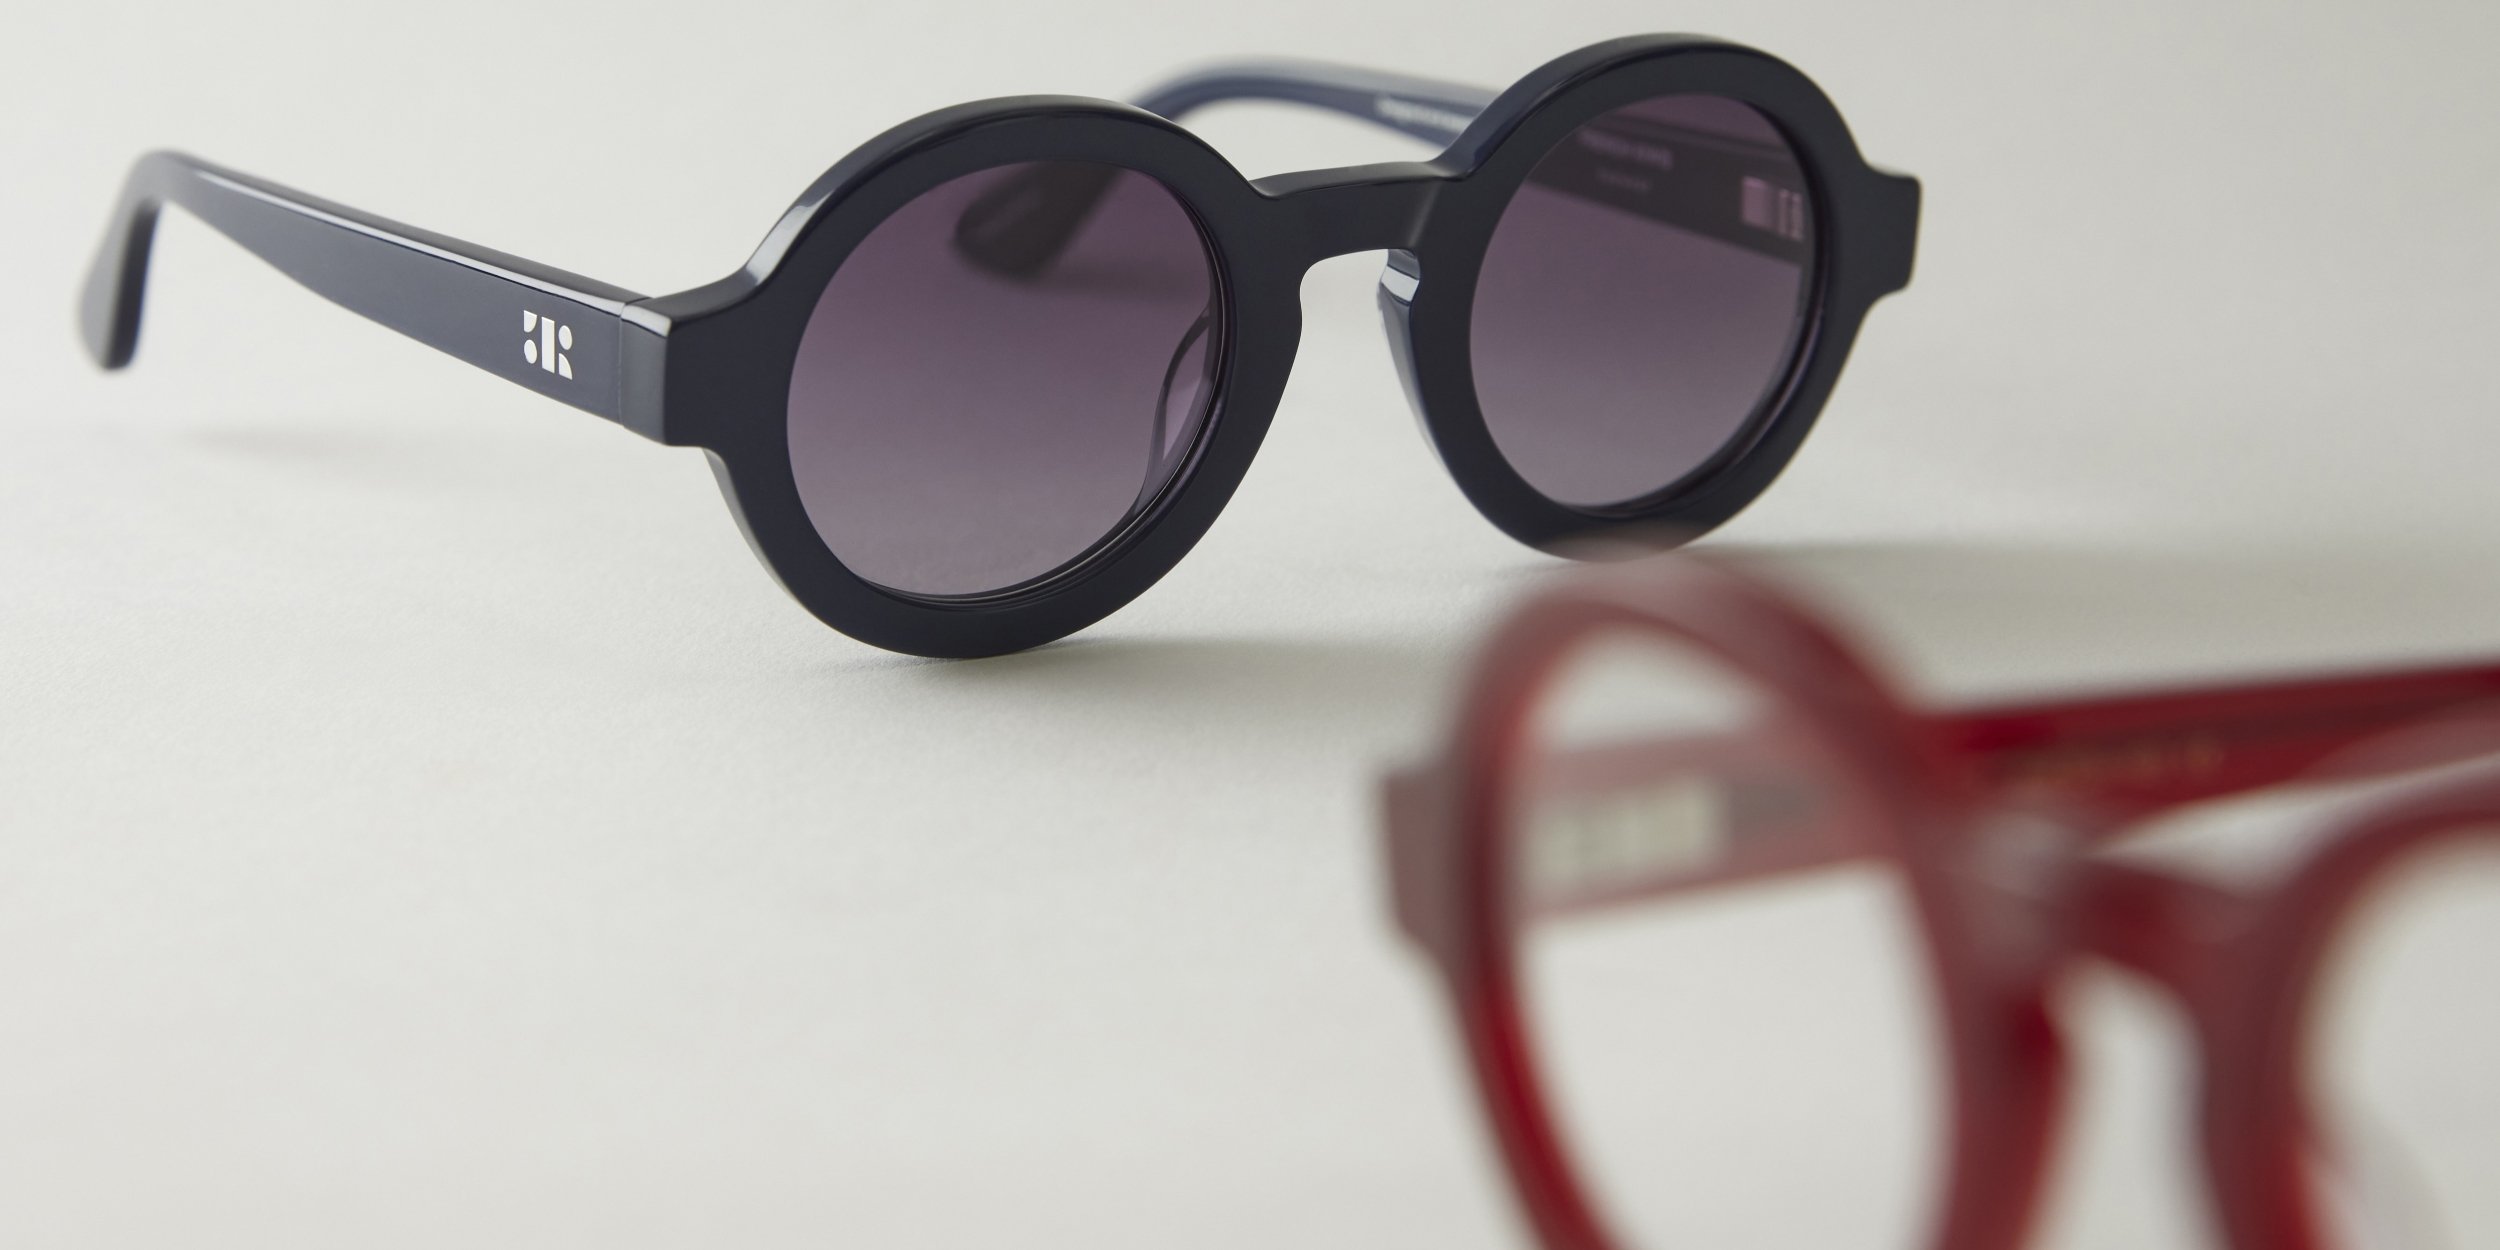 Photo Details of Lola Sun Nude Sun Glasses in a room